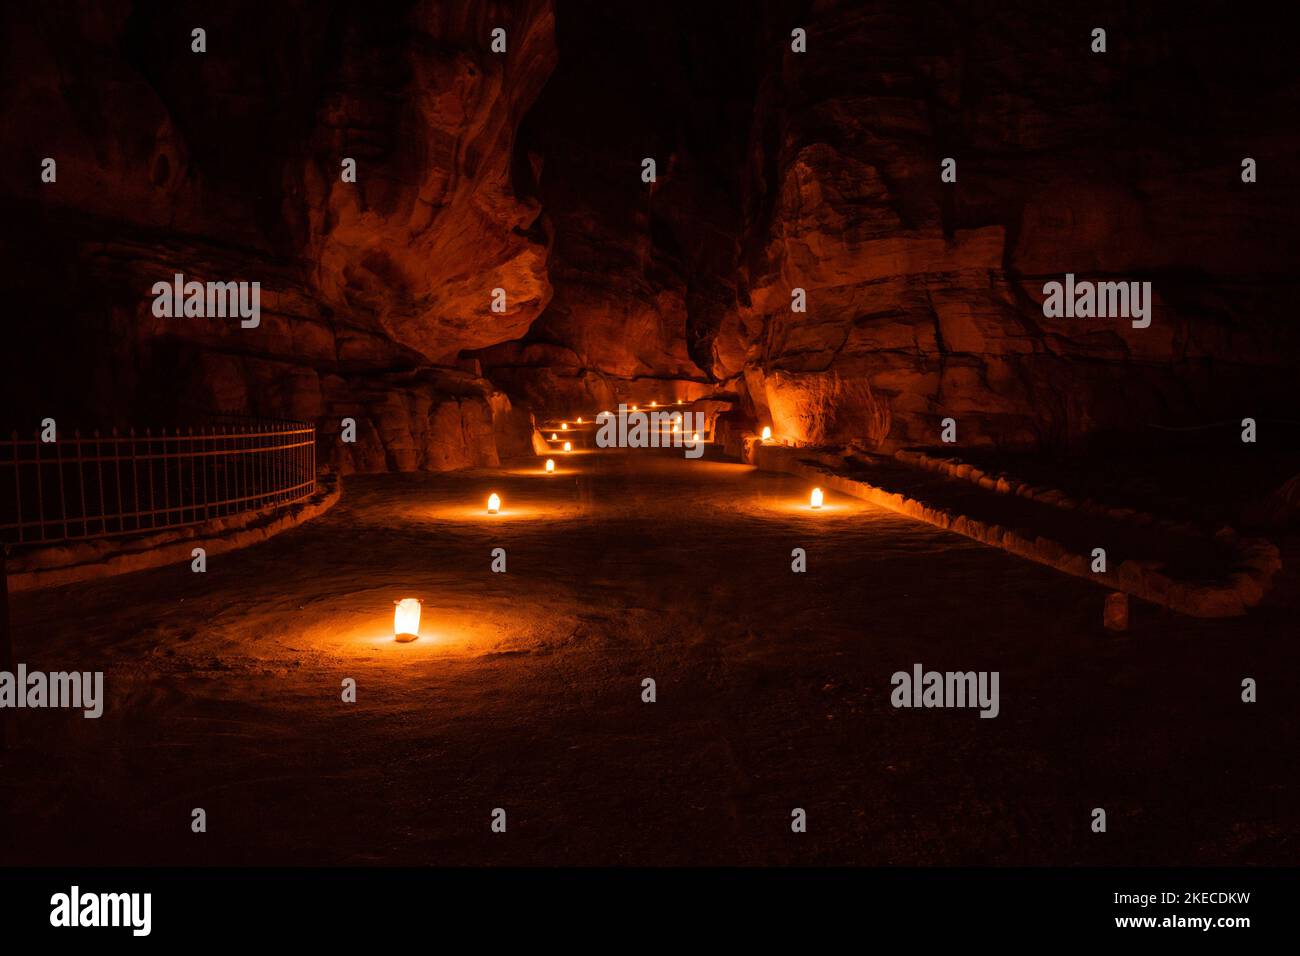 The Al Siq Gorge of Petra by Night, the Path illuminated by Candles Stock Photo